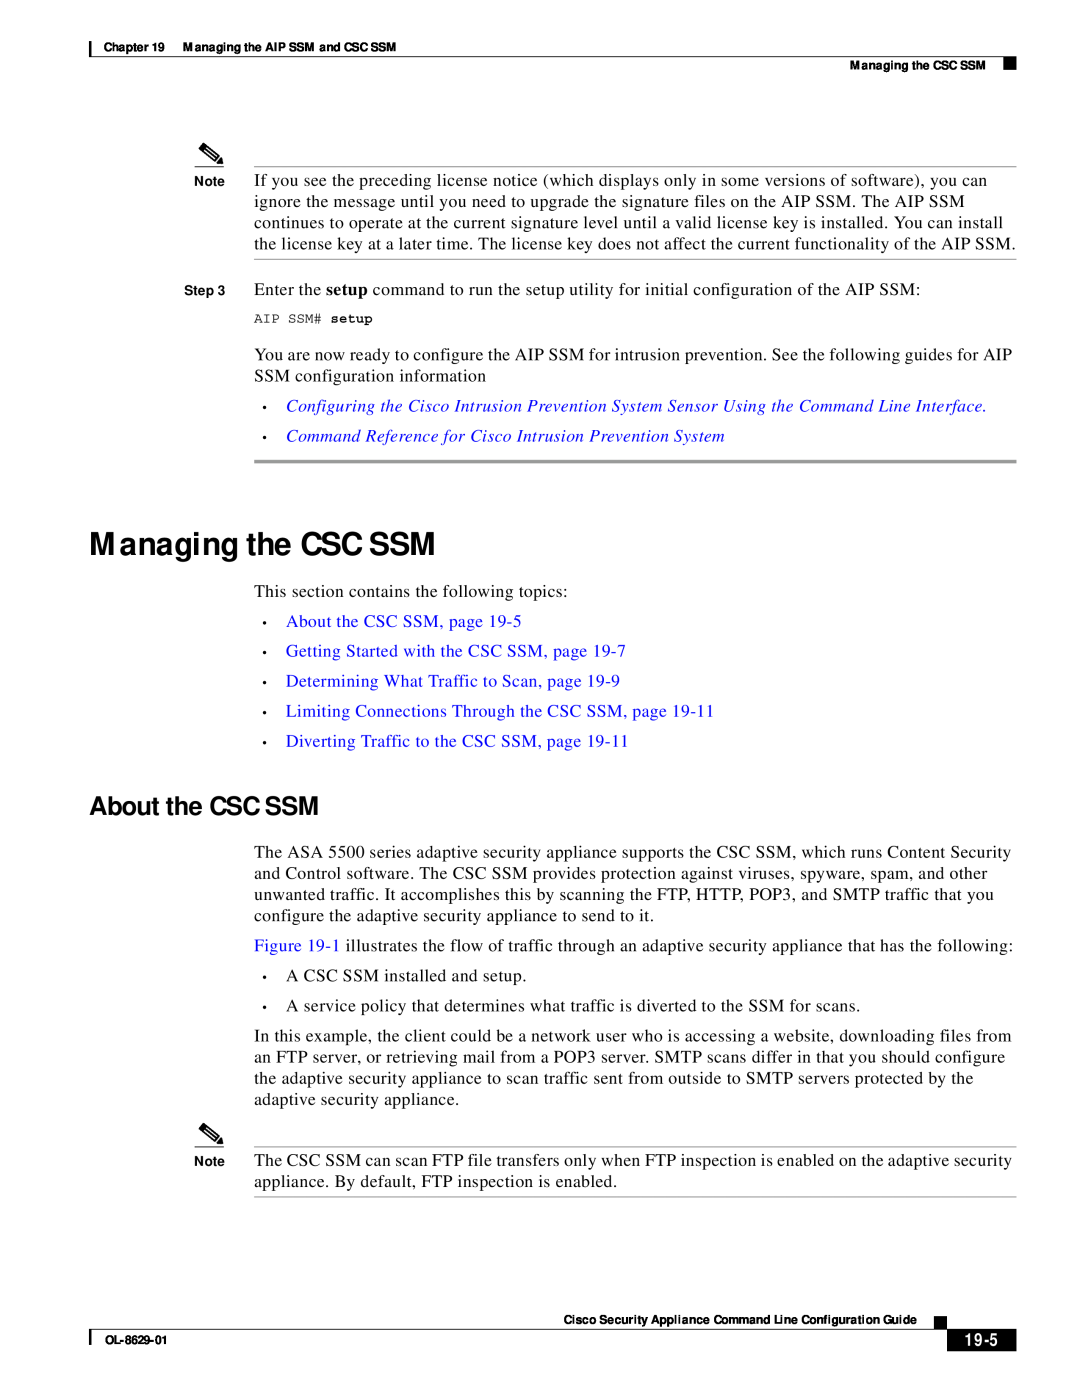 Cisco Systems ASA 5500 Managing the CSC SSM, •About the CSC SSM, page, •Getting Started with the CSC SSM, page, 19-5 